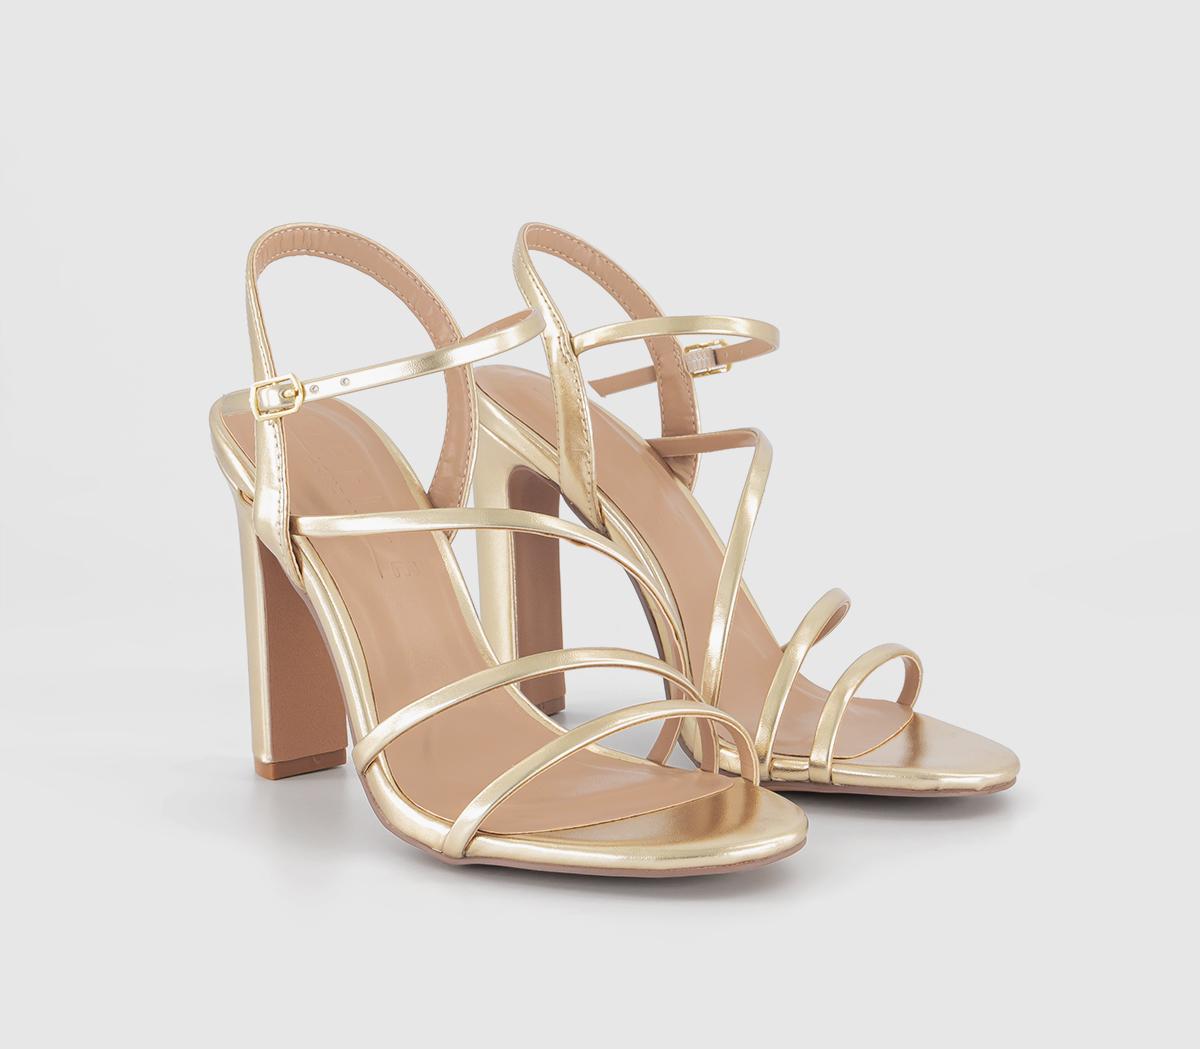 OFFICE Womens Hannah Strappy Heeled Sandal Gold, 6